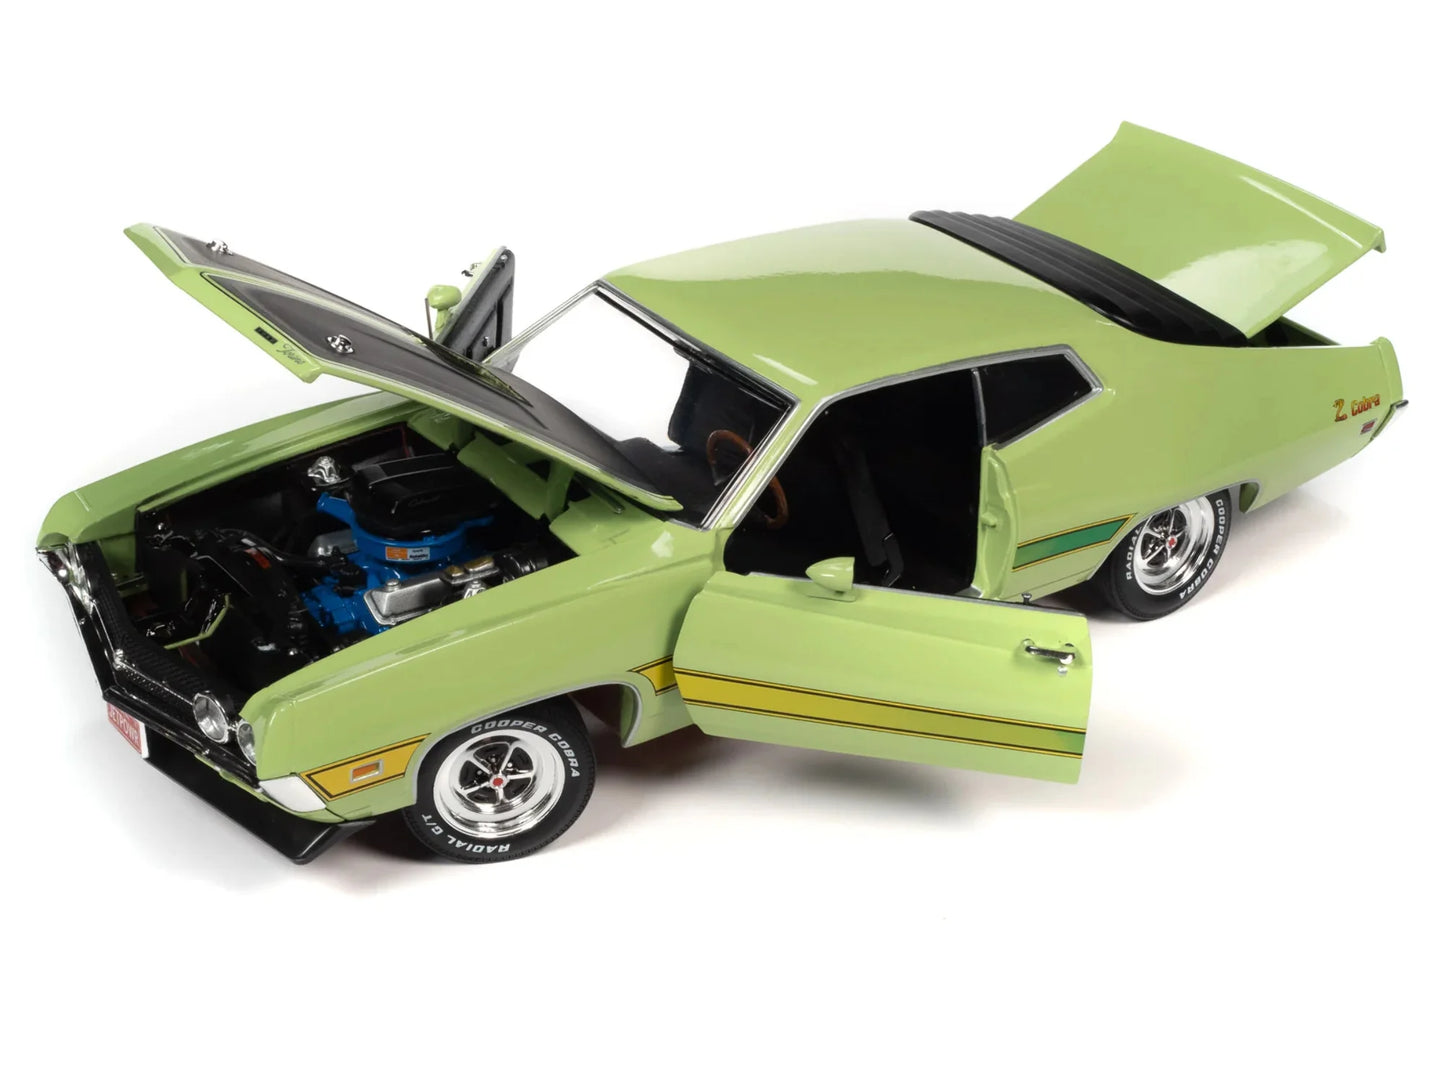 1971 Ford Torino Cobra Grabber Lime Green with Matt Black Hood and Stripes "Class of 1971" 1/18 Diecast Model Car by Auto World